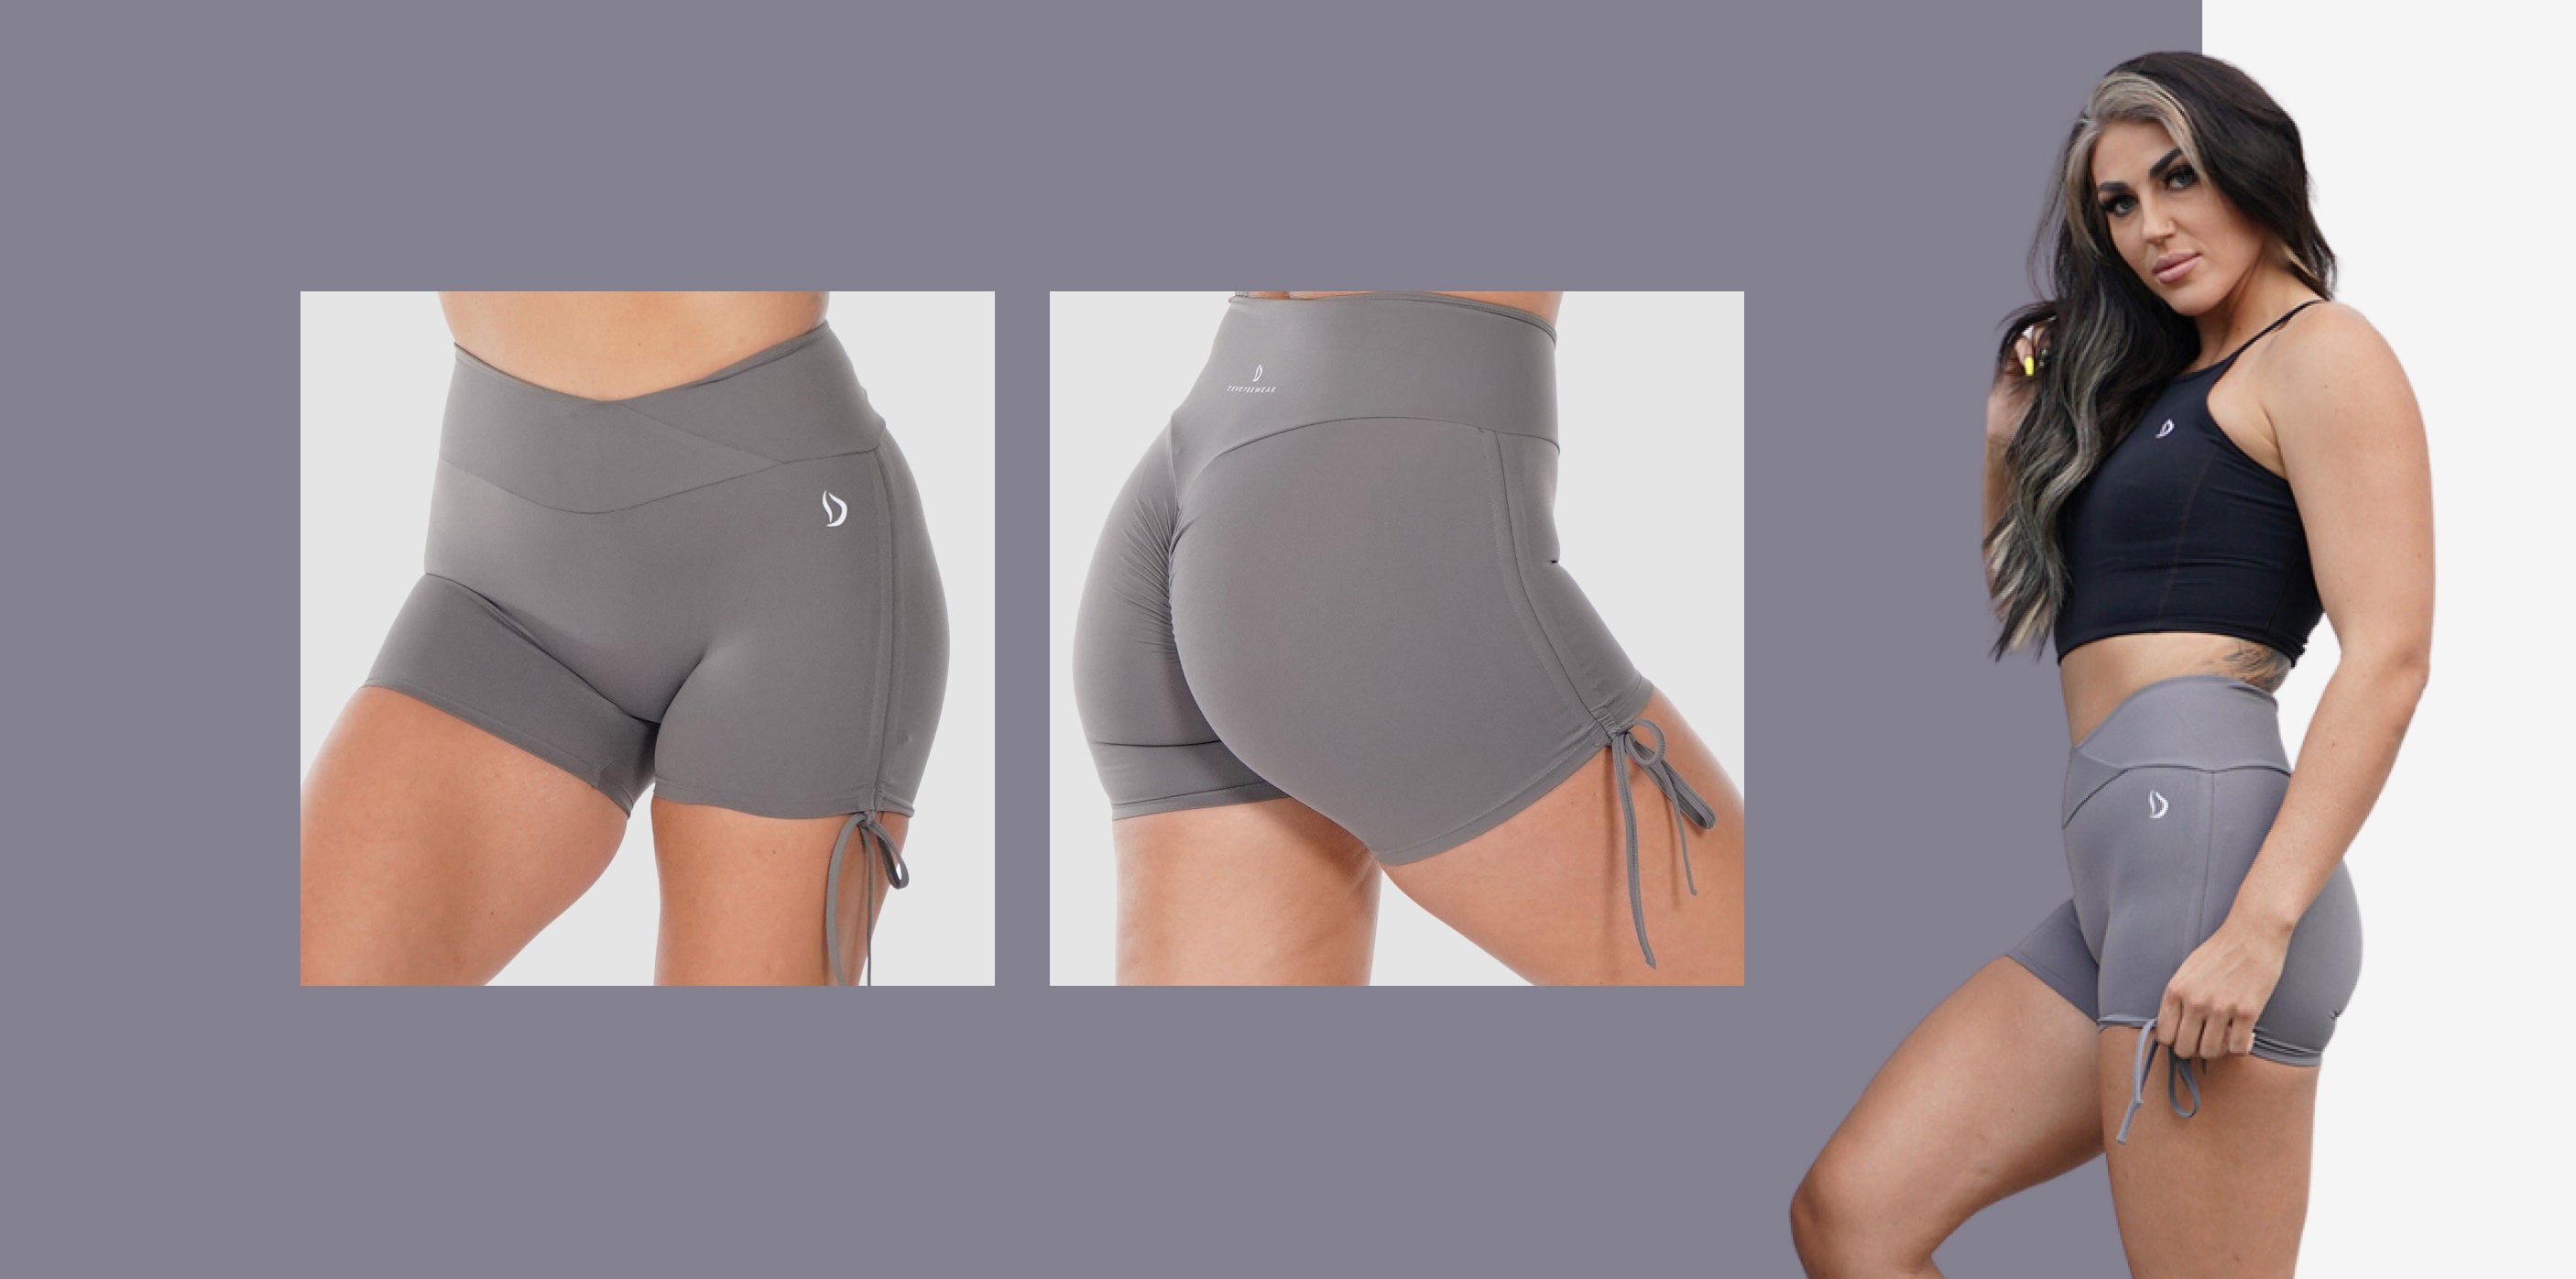 Scrunch bum shorts have become incredibly popular for good reason. The ruched design enhances the natural shape of your bum, offering both aesthetic appeal and comfort. In shorts like the Bumboost Scrunch Bum Short, the scrunching mechanism adds a flattering lift, making them ideal for workouts and selfies alike!